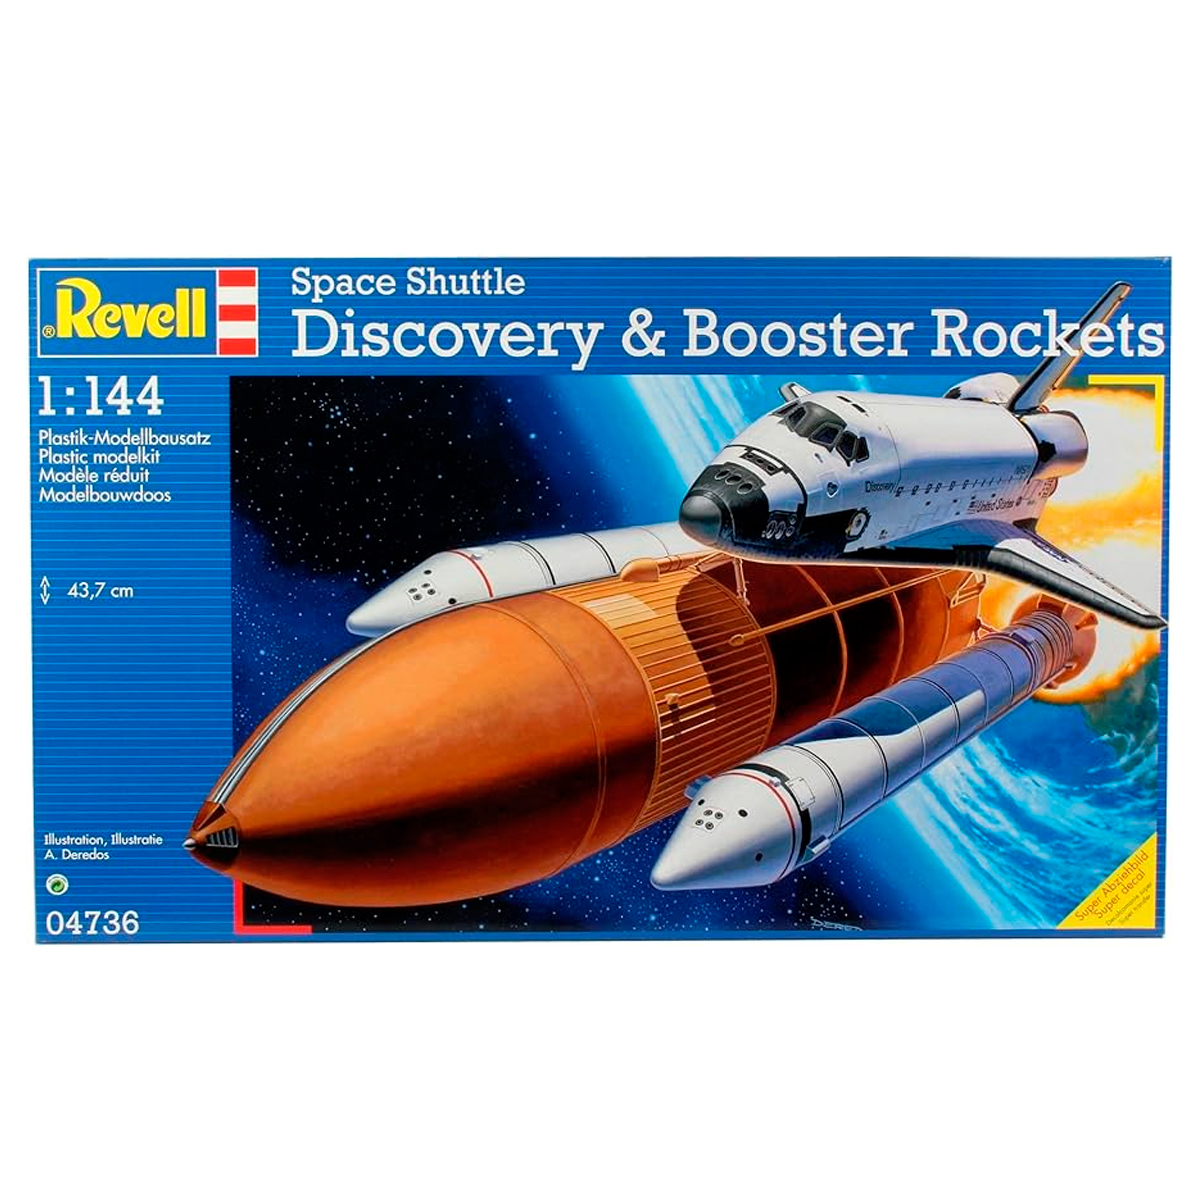 Space Shuttle «Discovery» & Booster Rockets 1/144